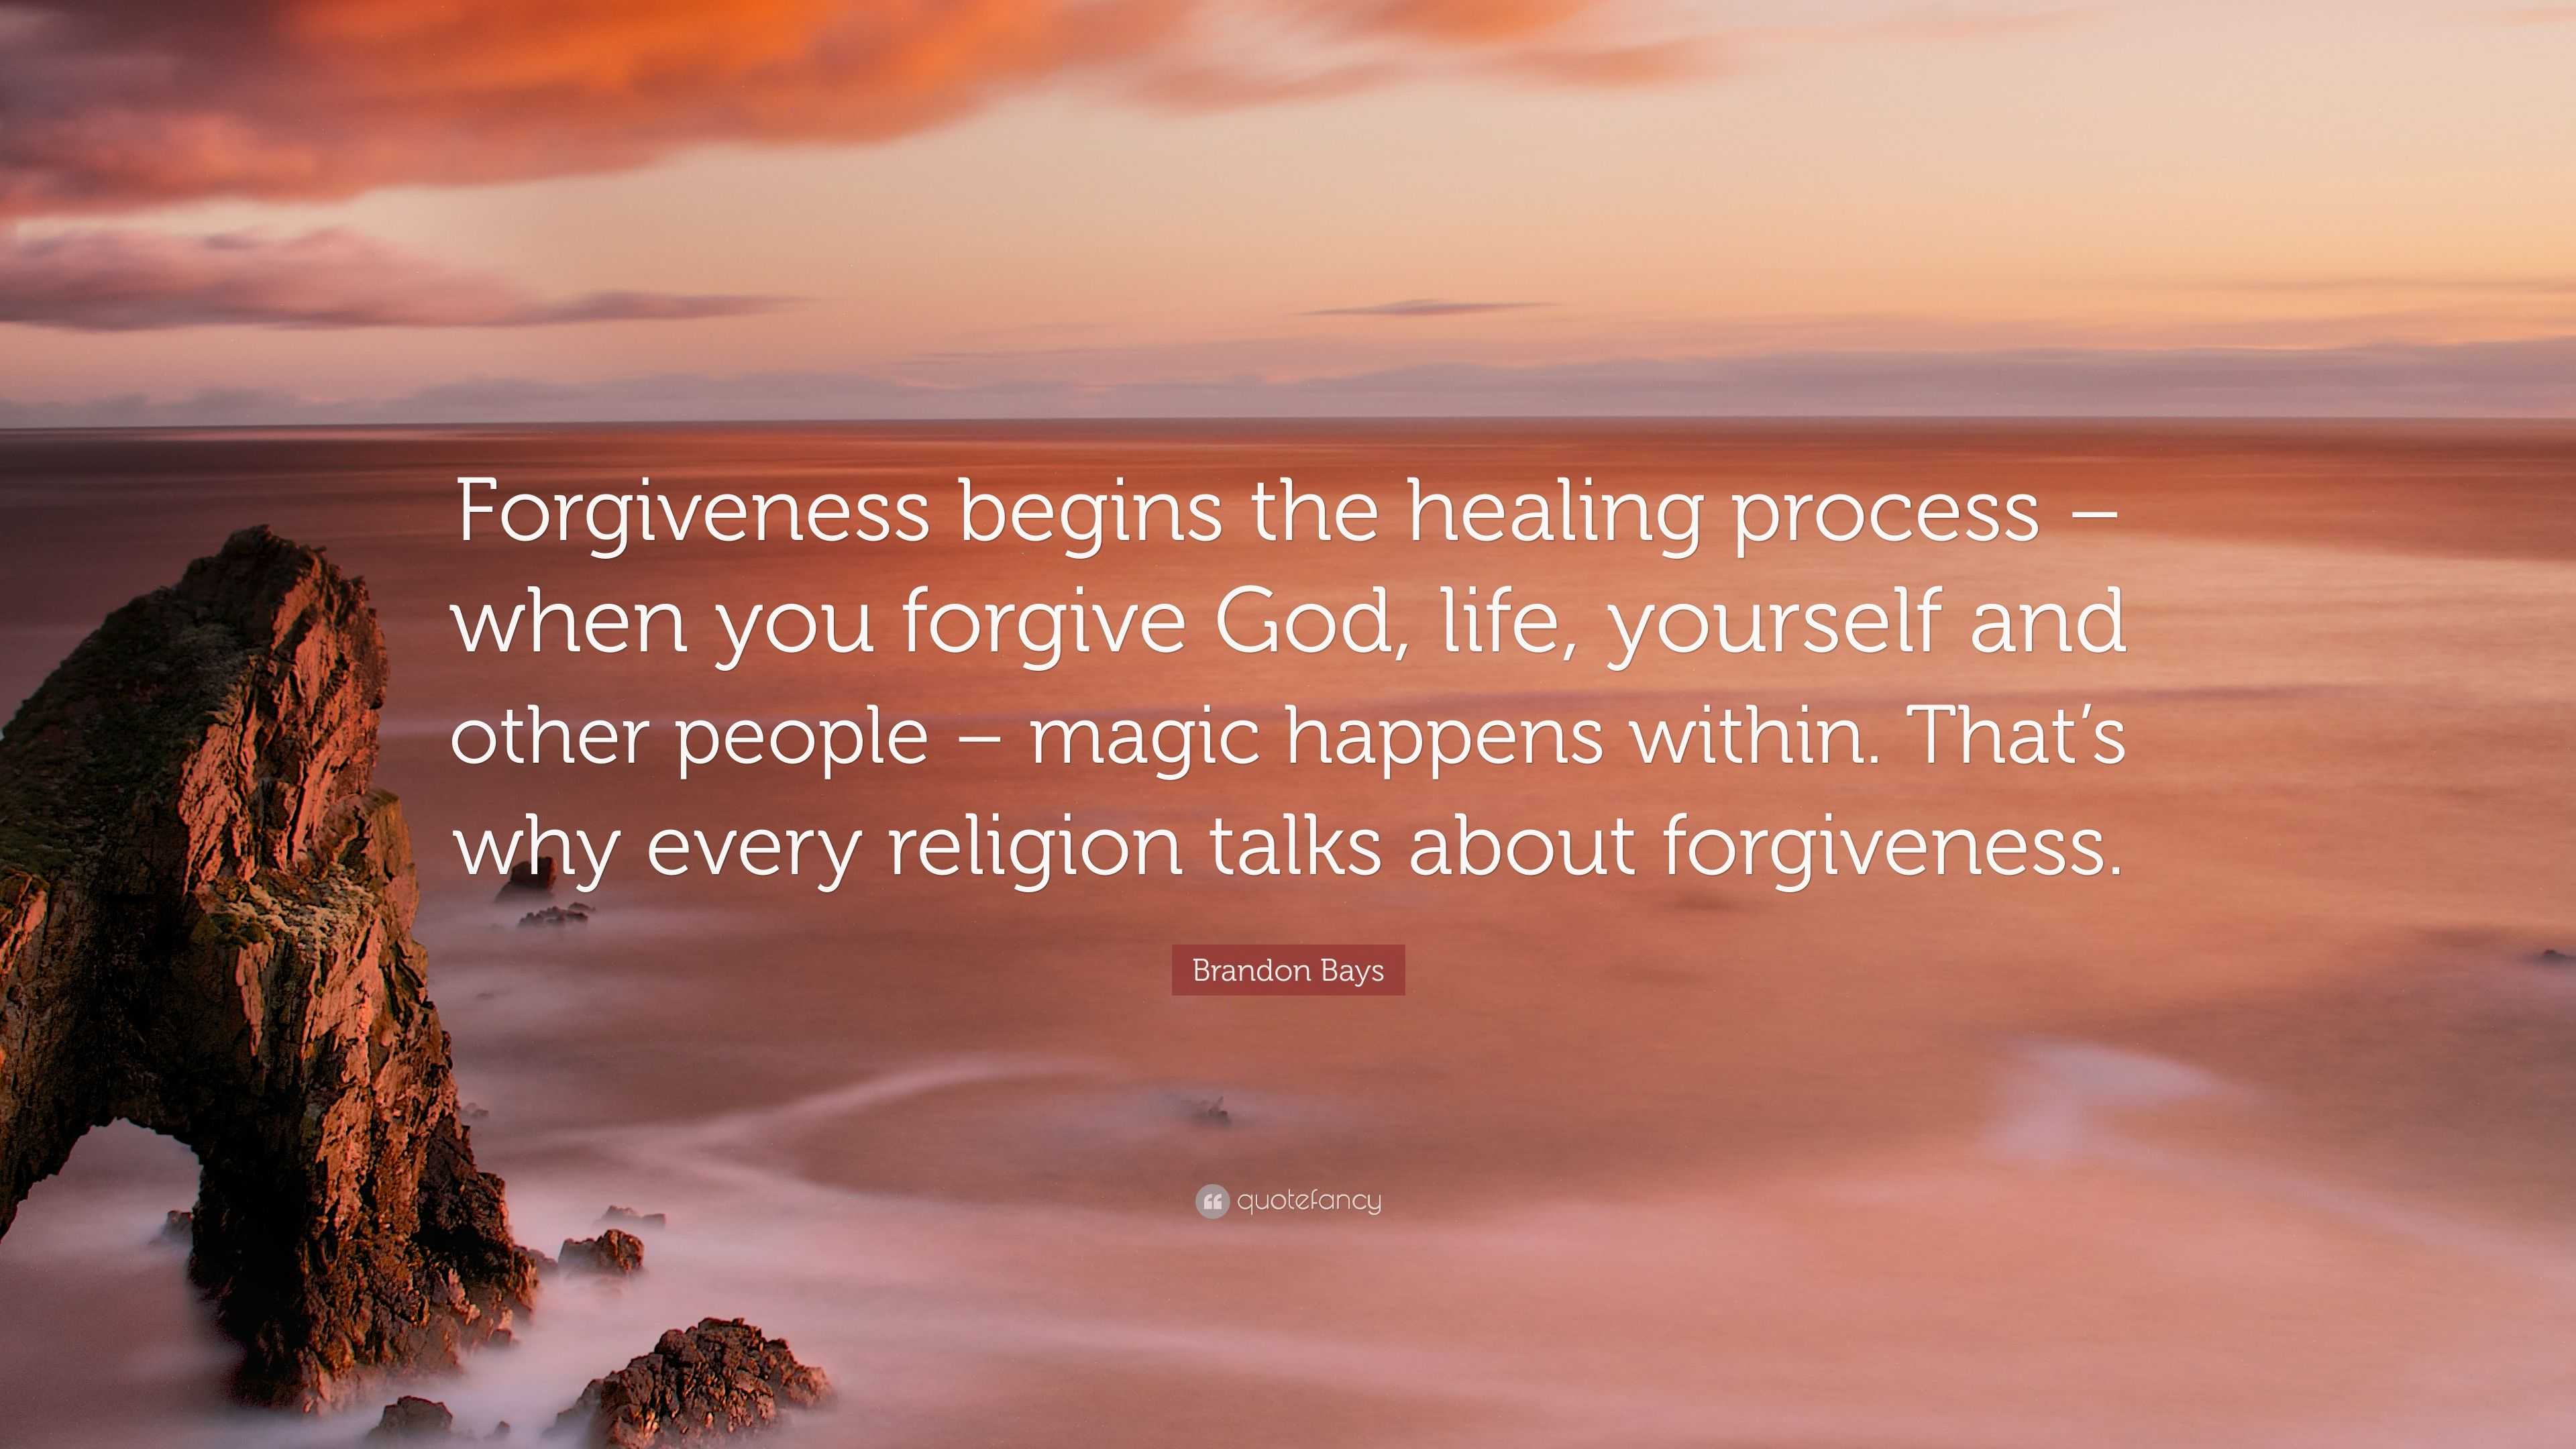 Brandon Bays Quote Forgiveness Begins The Healing Process When You Forgive God Life Yourself And Other People Magic Happens Within T 7 Wallpapers Quotefancy